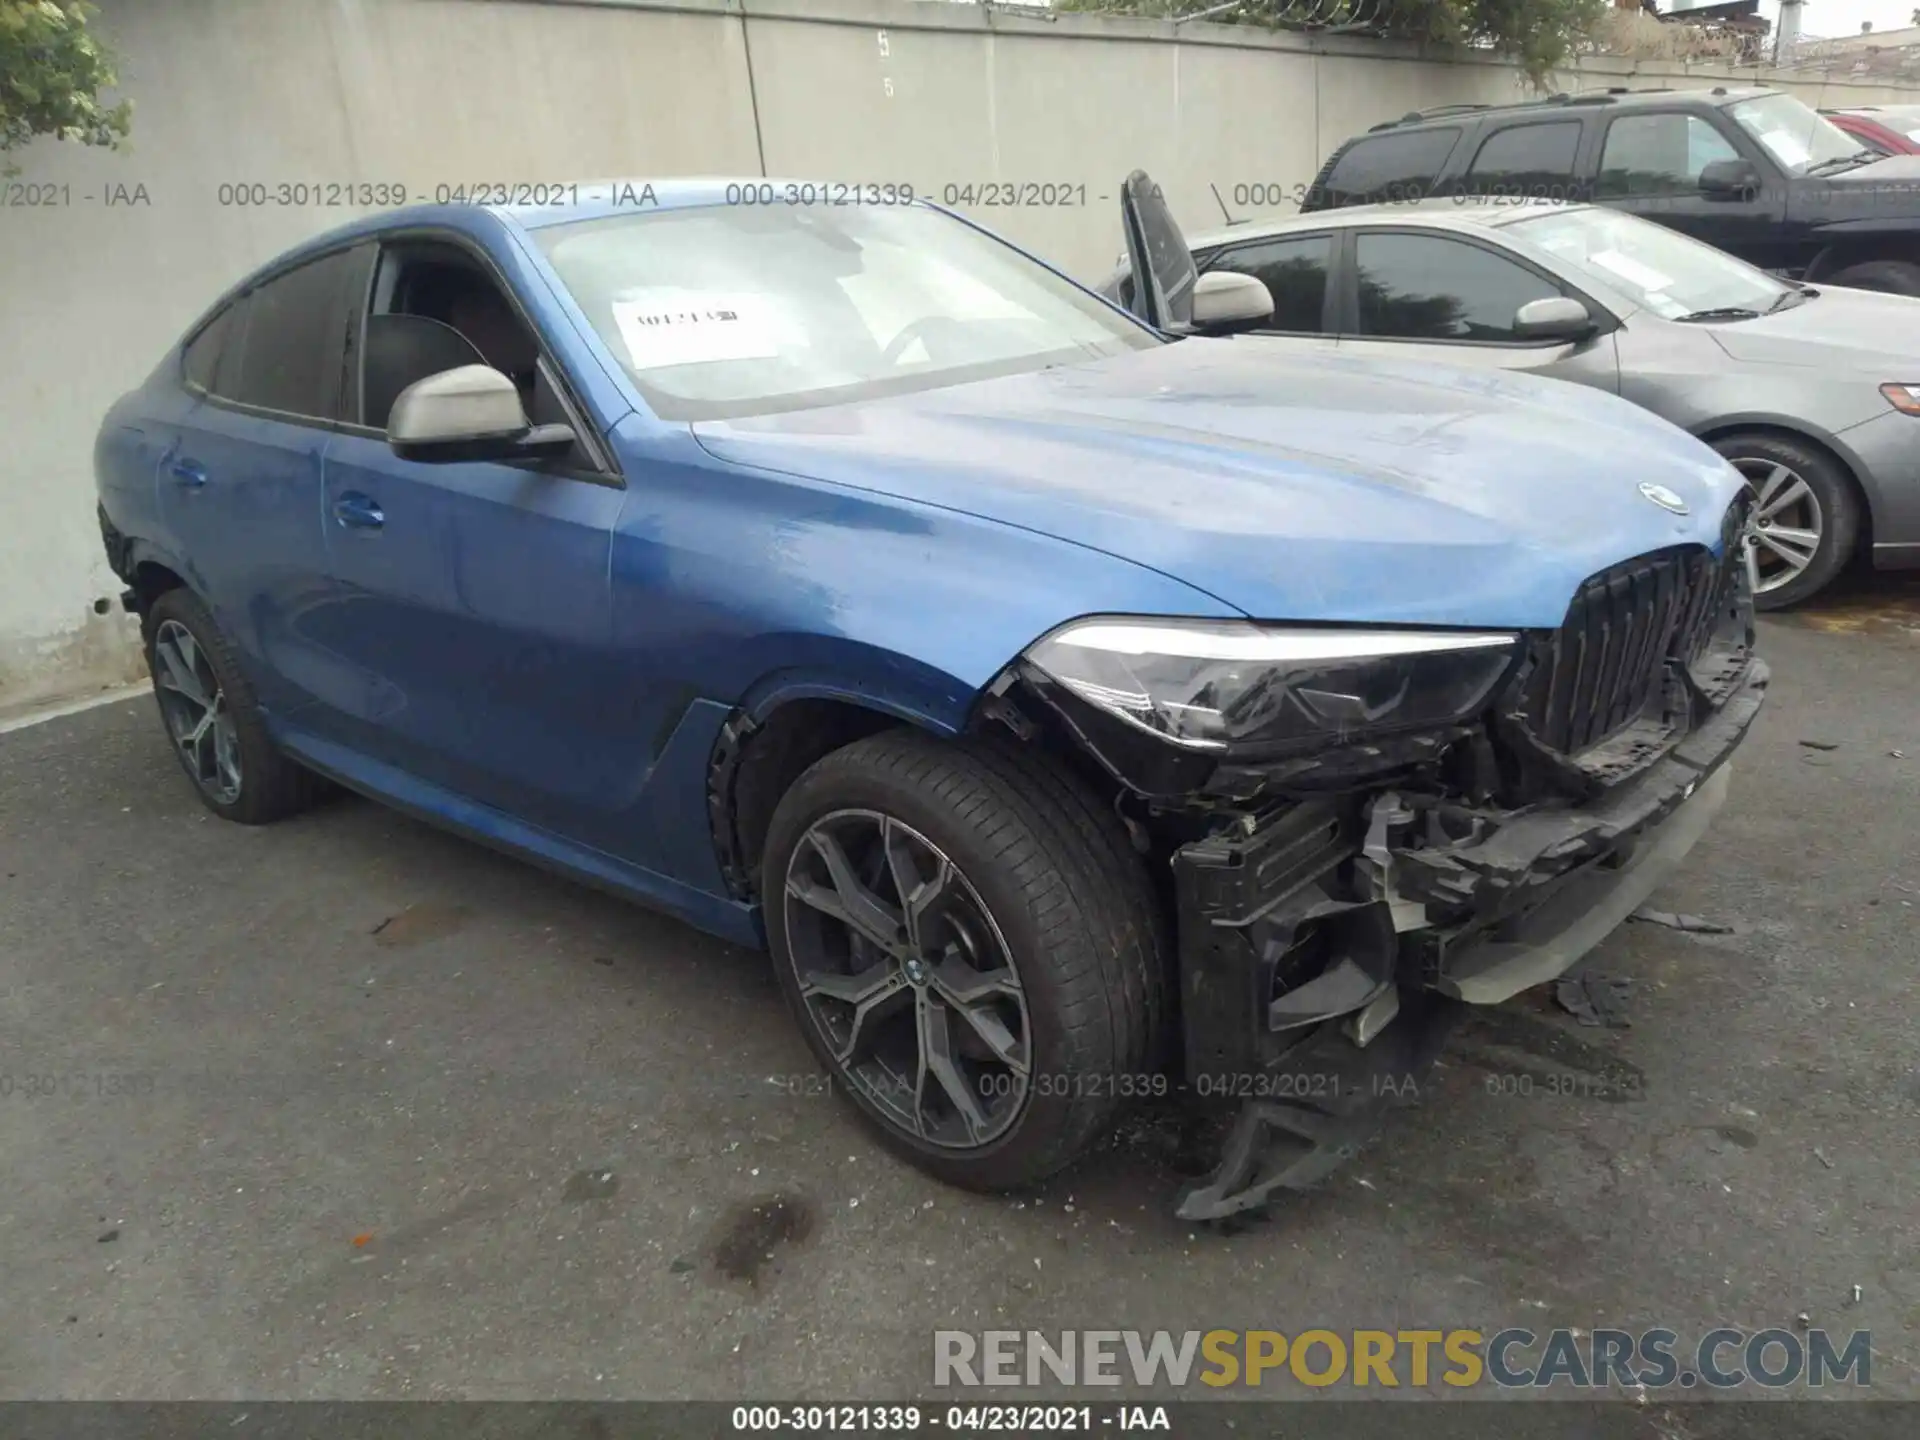 1 Photograph of a damaged car 5UXCY8C02LLE40581 BMW X6 2020